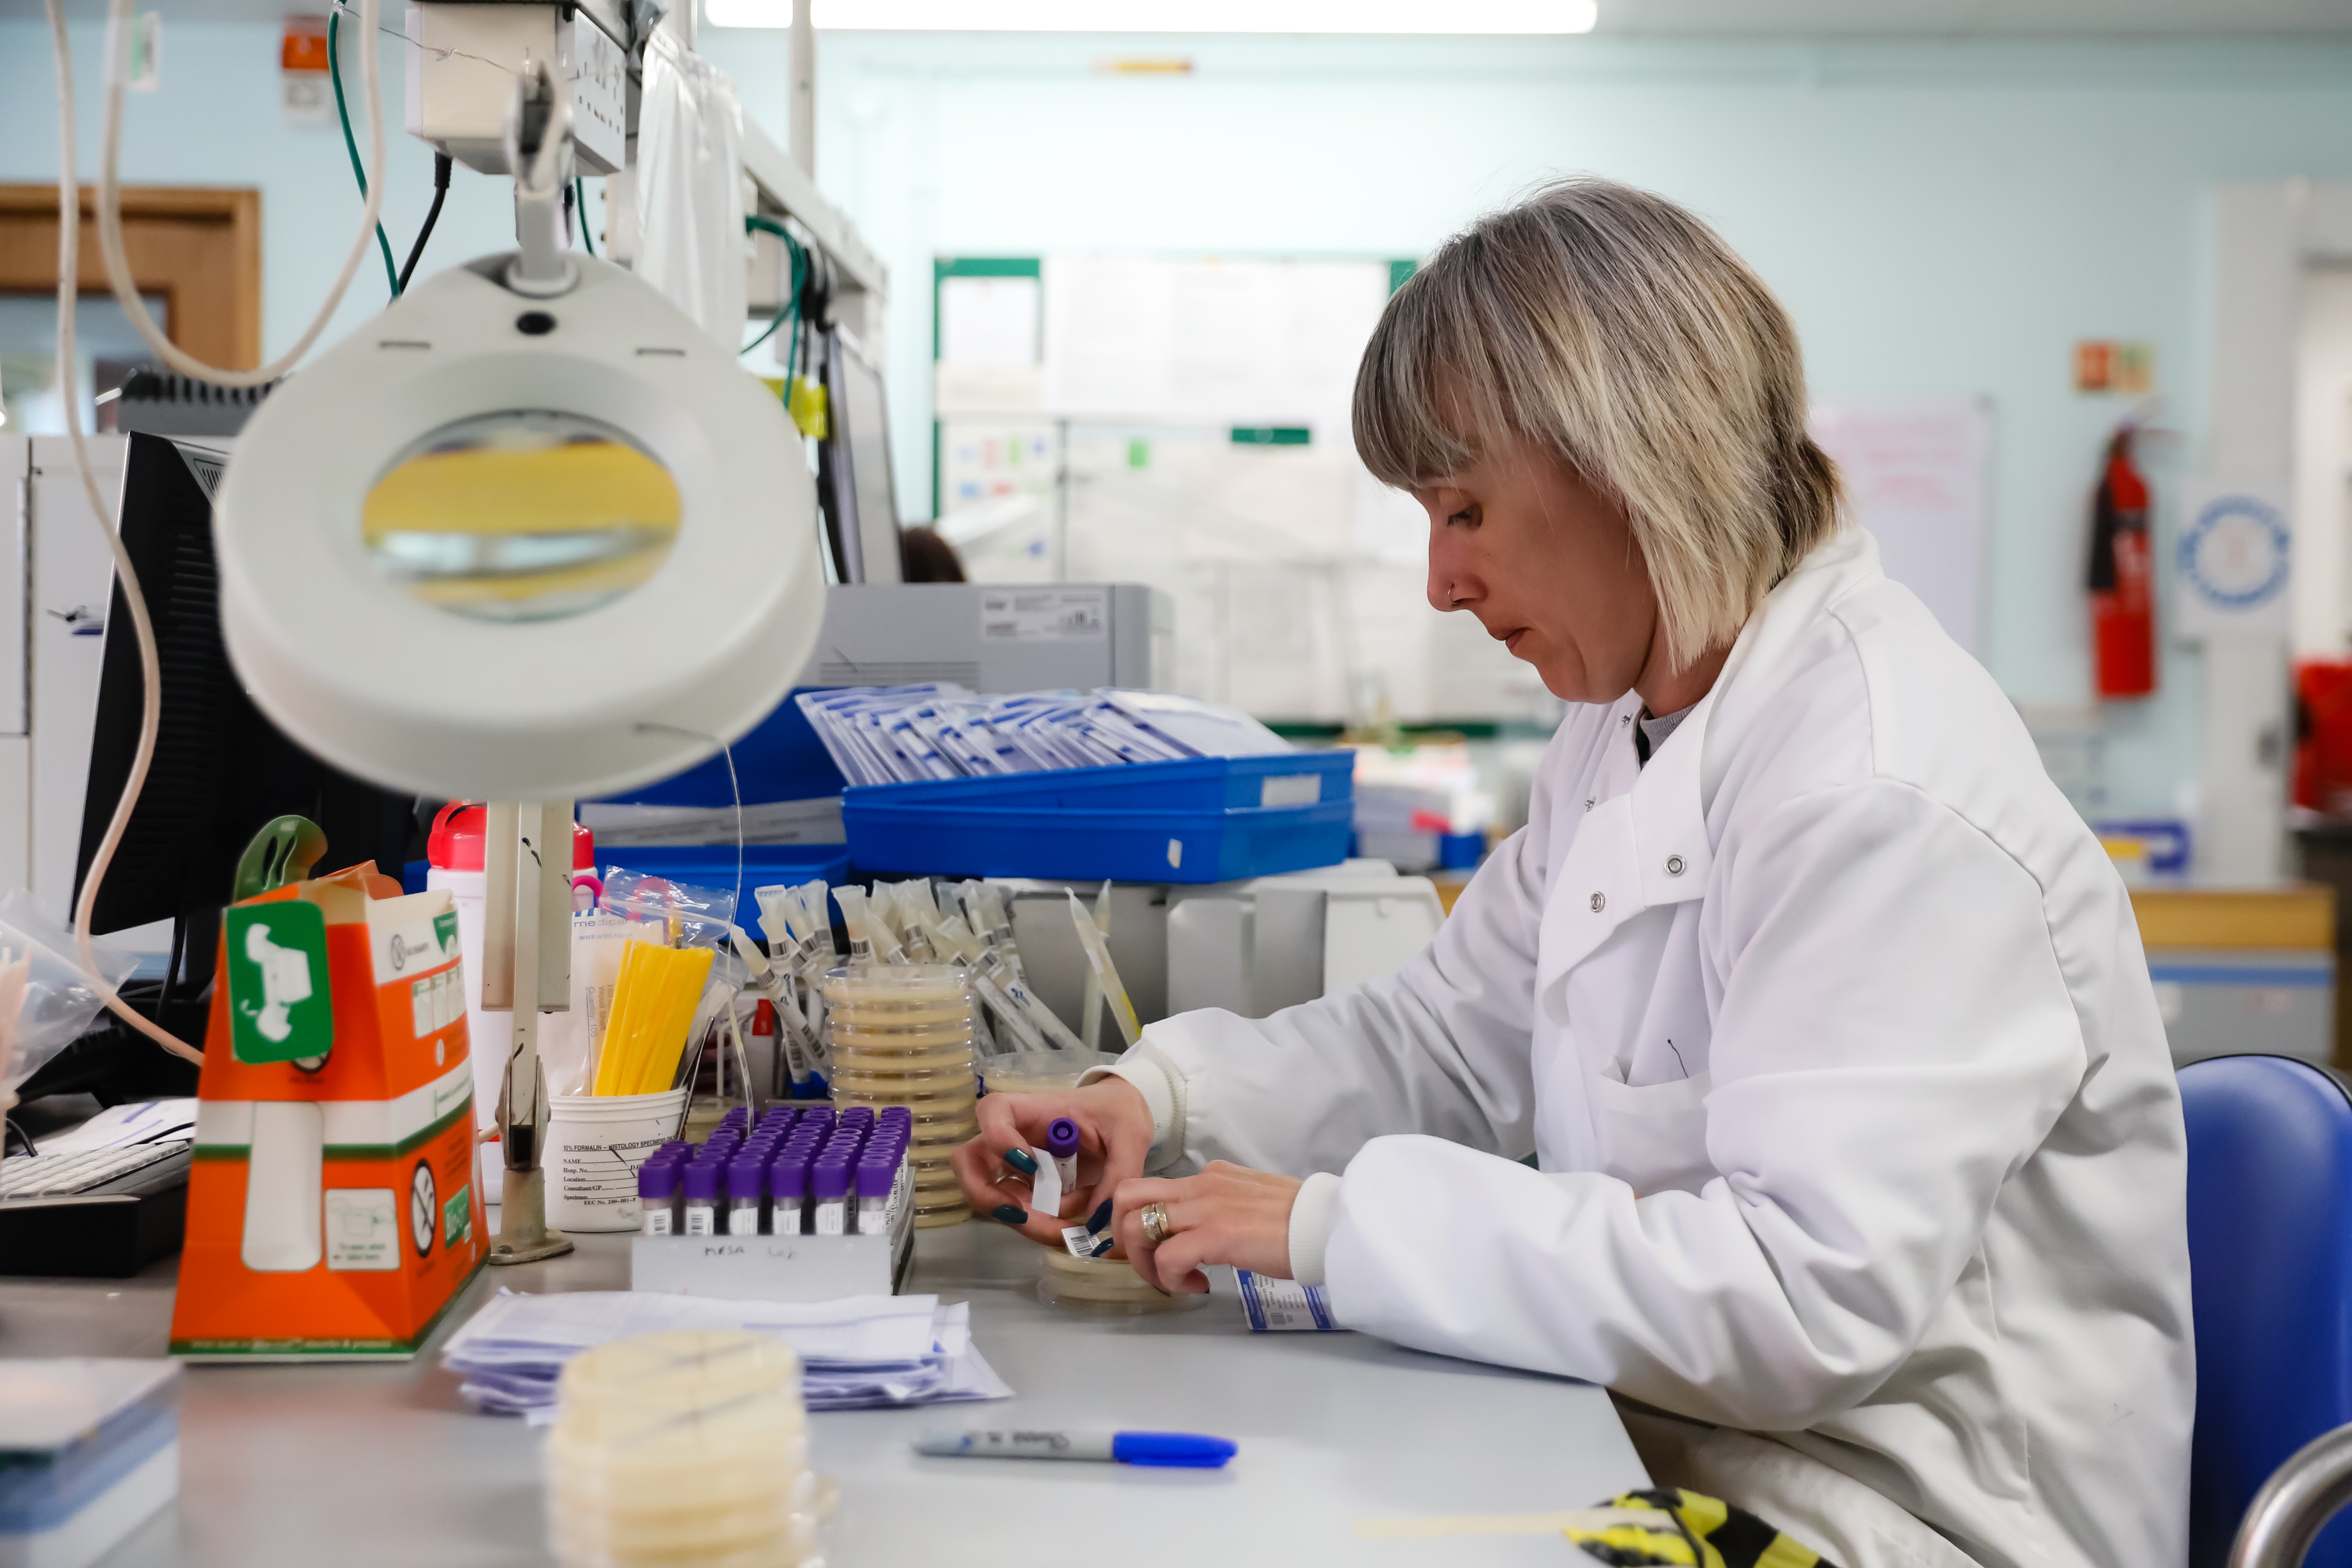 A Morecambe Bay NHS colleague in a white lab coat sat at a desk with lab equipment including test tubes and petri dishes